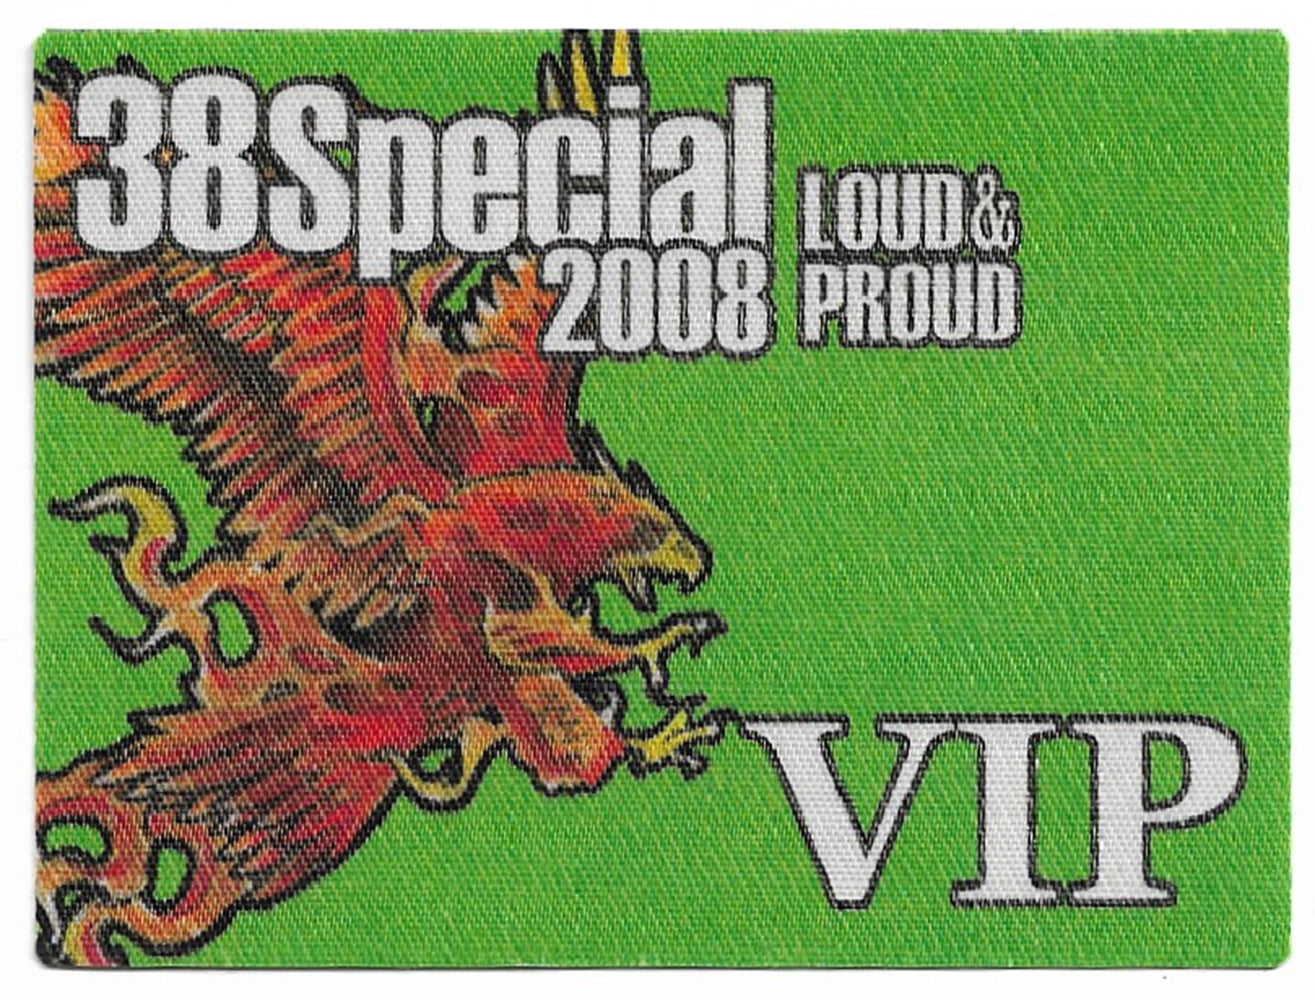 38 SPECIAL 2008 Back Stage Pass - Humper Bumper Backstage Pass Sticker 